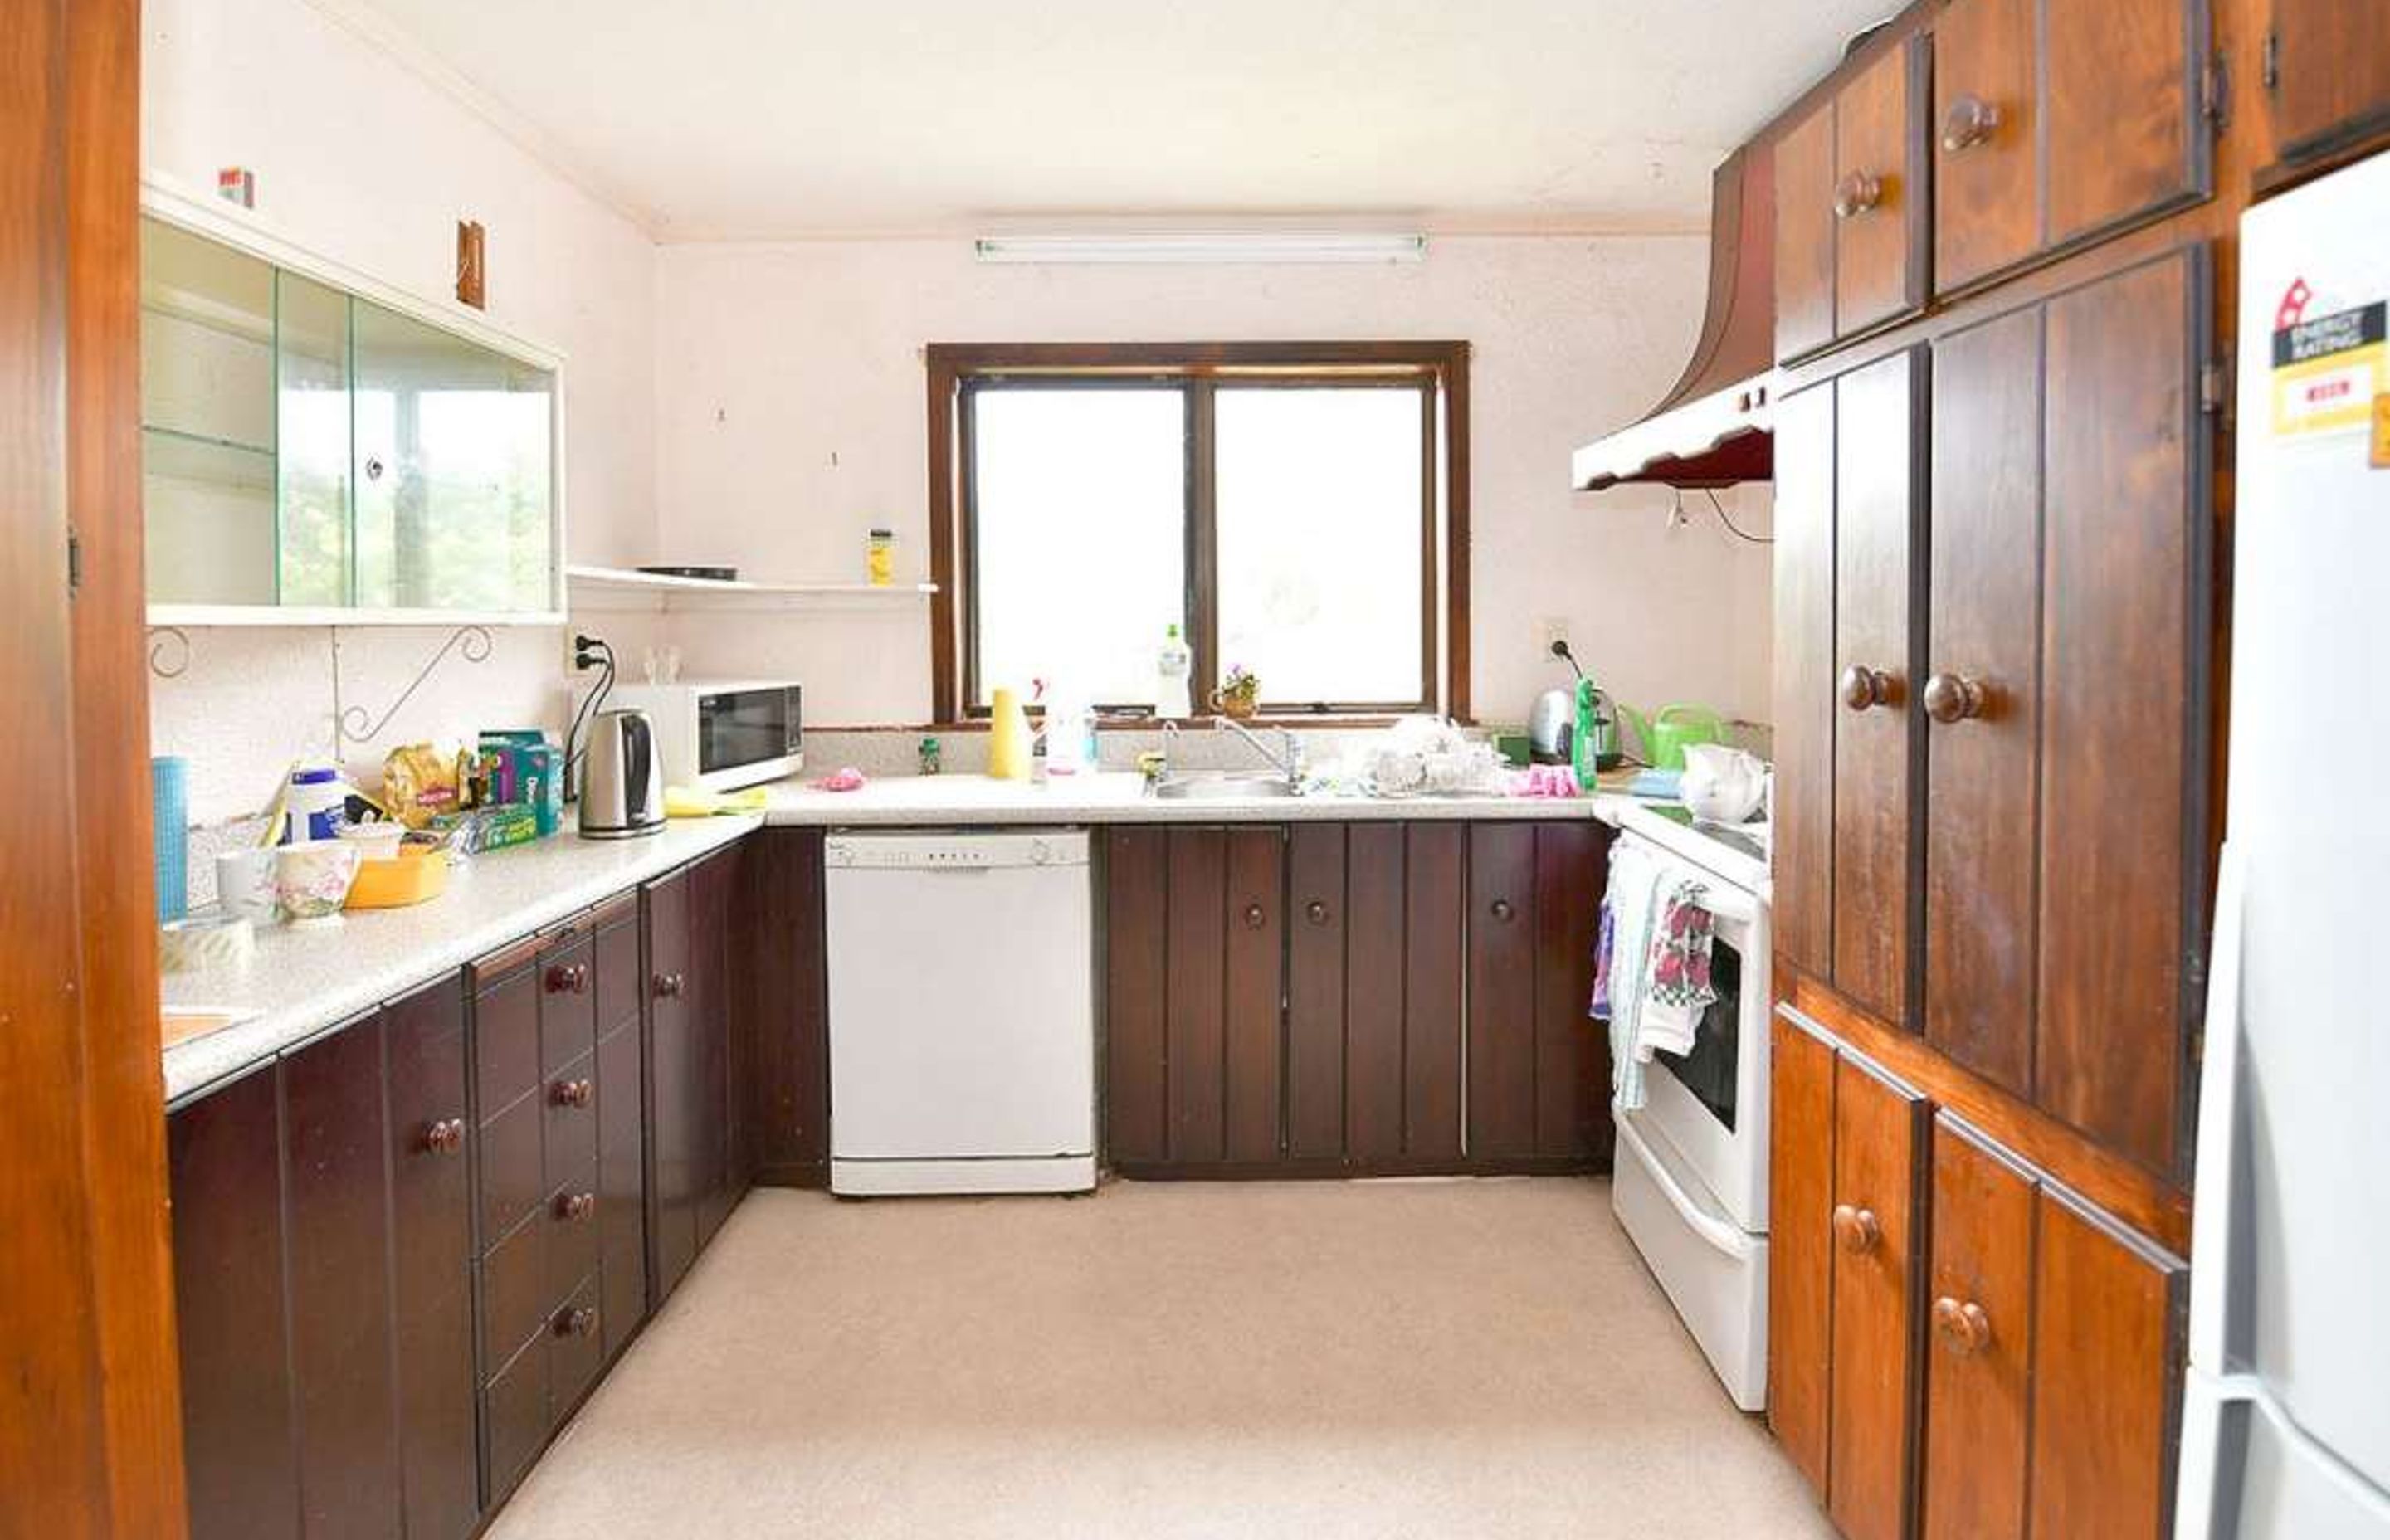 BEFORE the kitchen was renovated